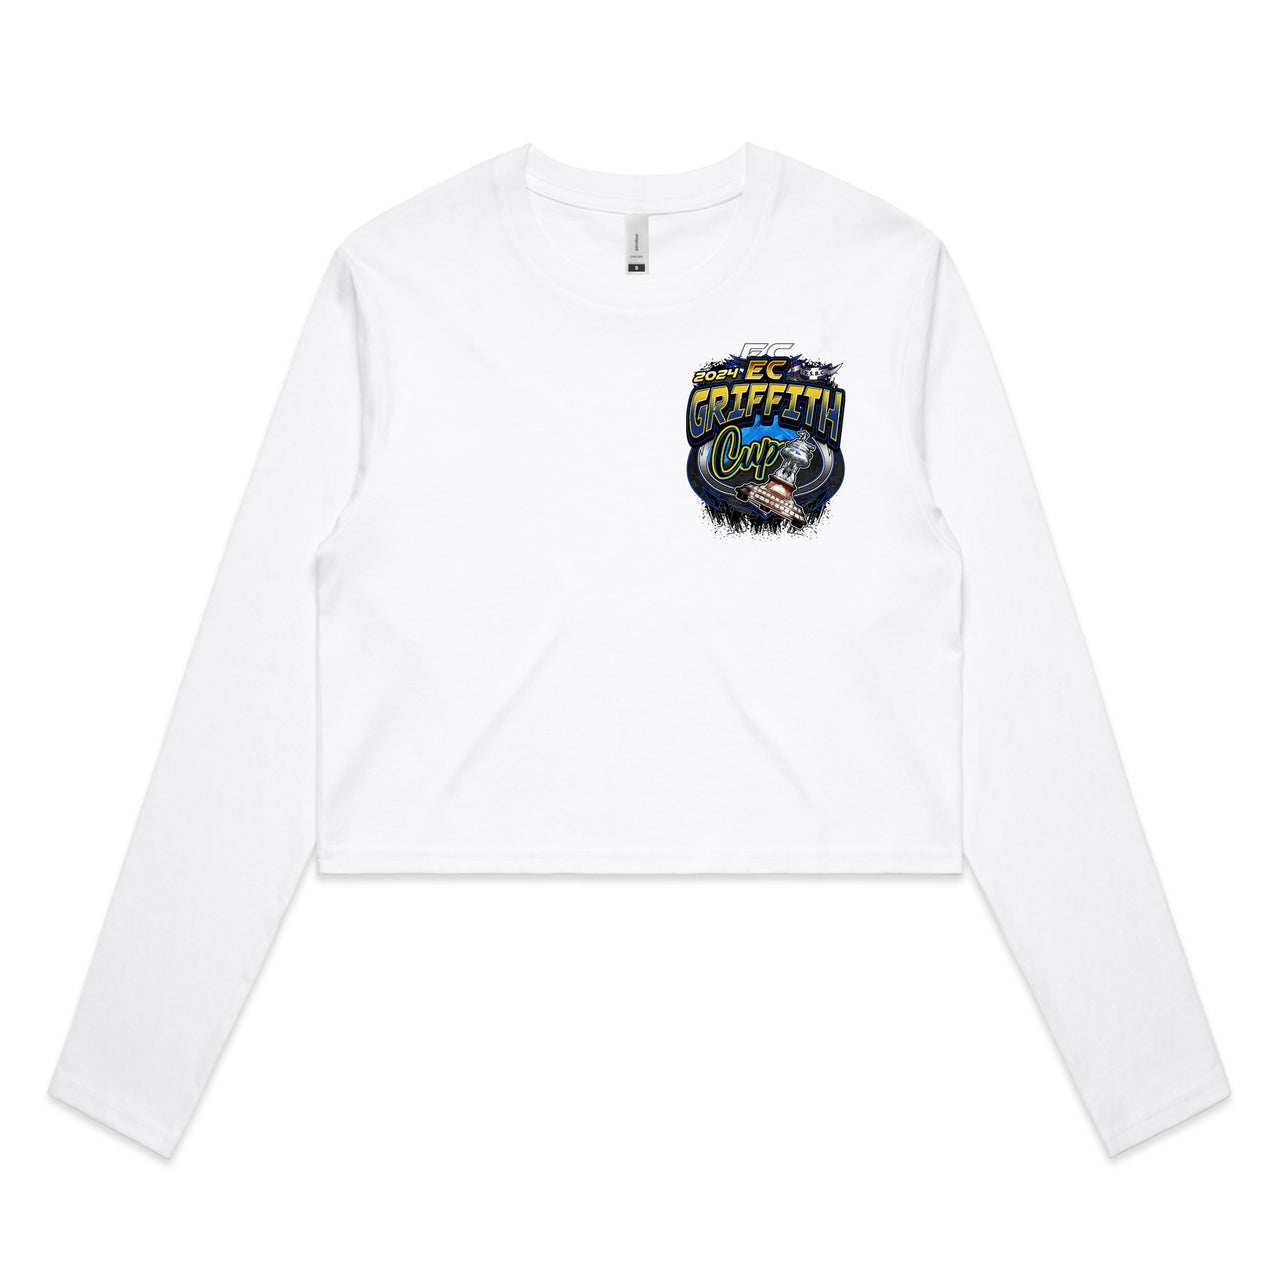 E.C Griffith Cup 2024 Event Ladies Crop Long Sleeve Tee